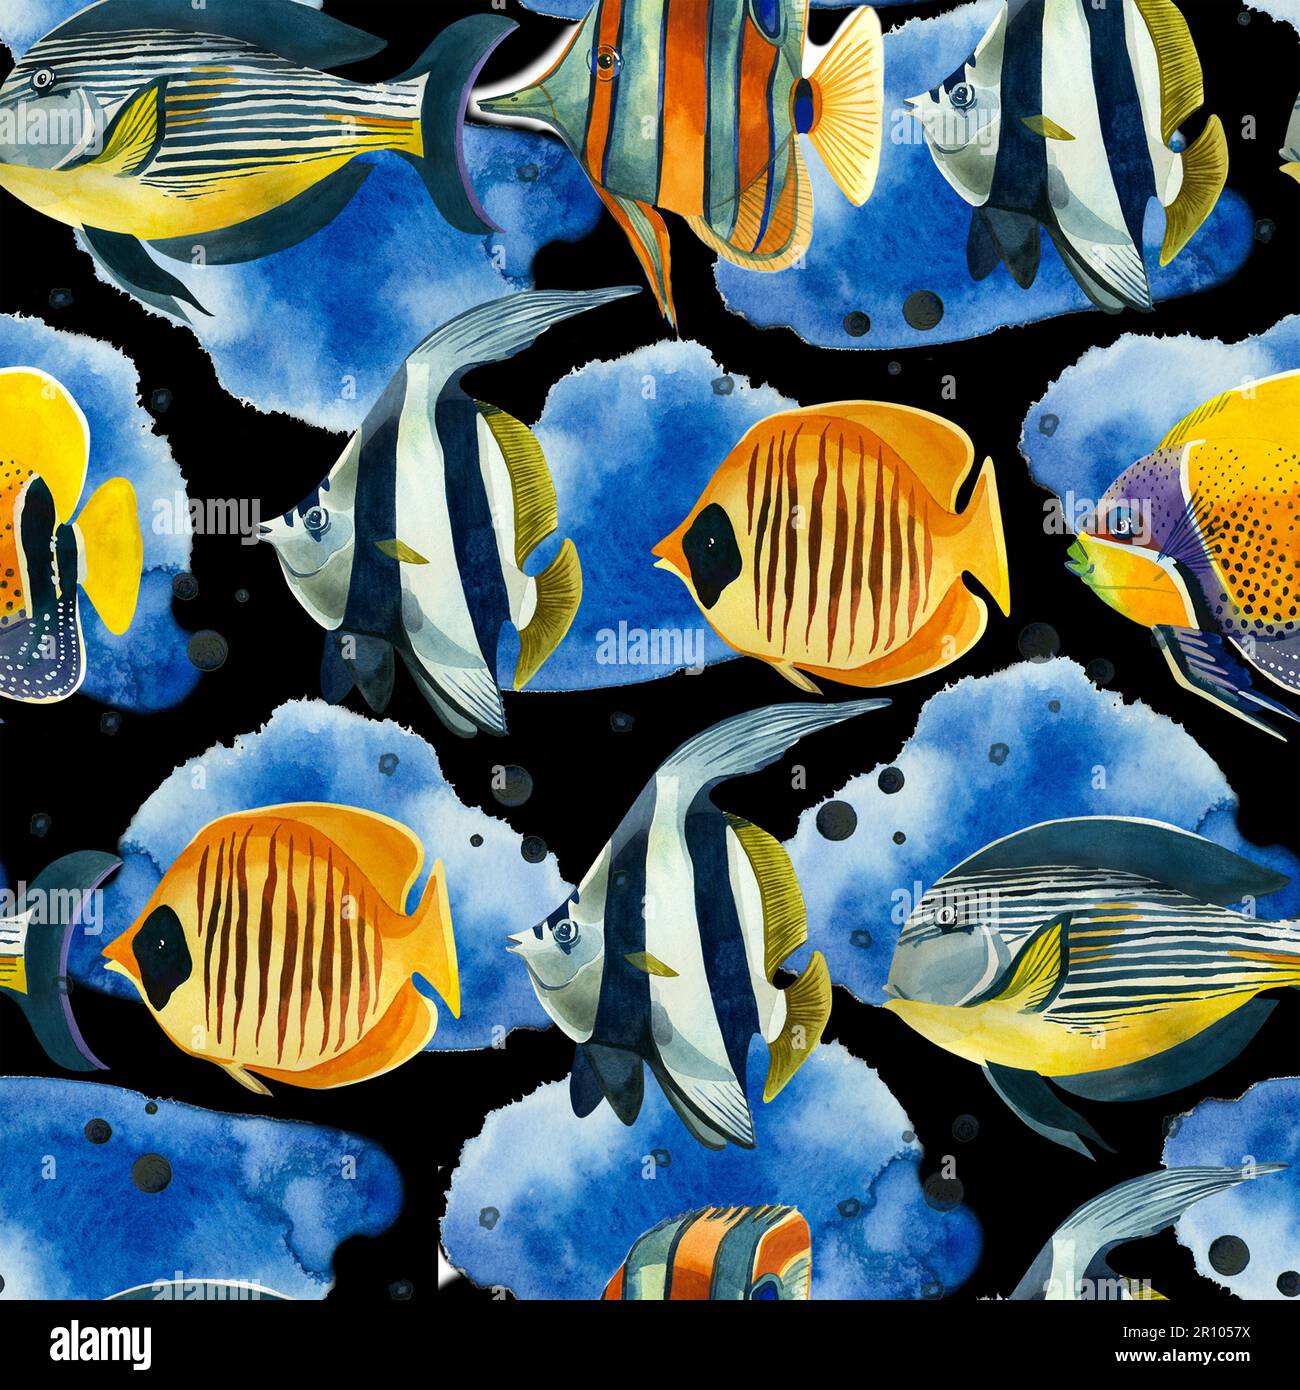 Seamless pattern. Tropical fish of bright colors, striped fish, blue spots, hand-drawn in watercolor on a dark background. Suitable for printing on fa Stock Photo